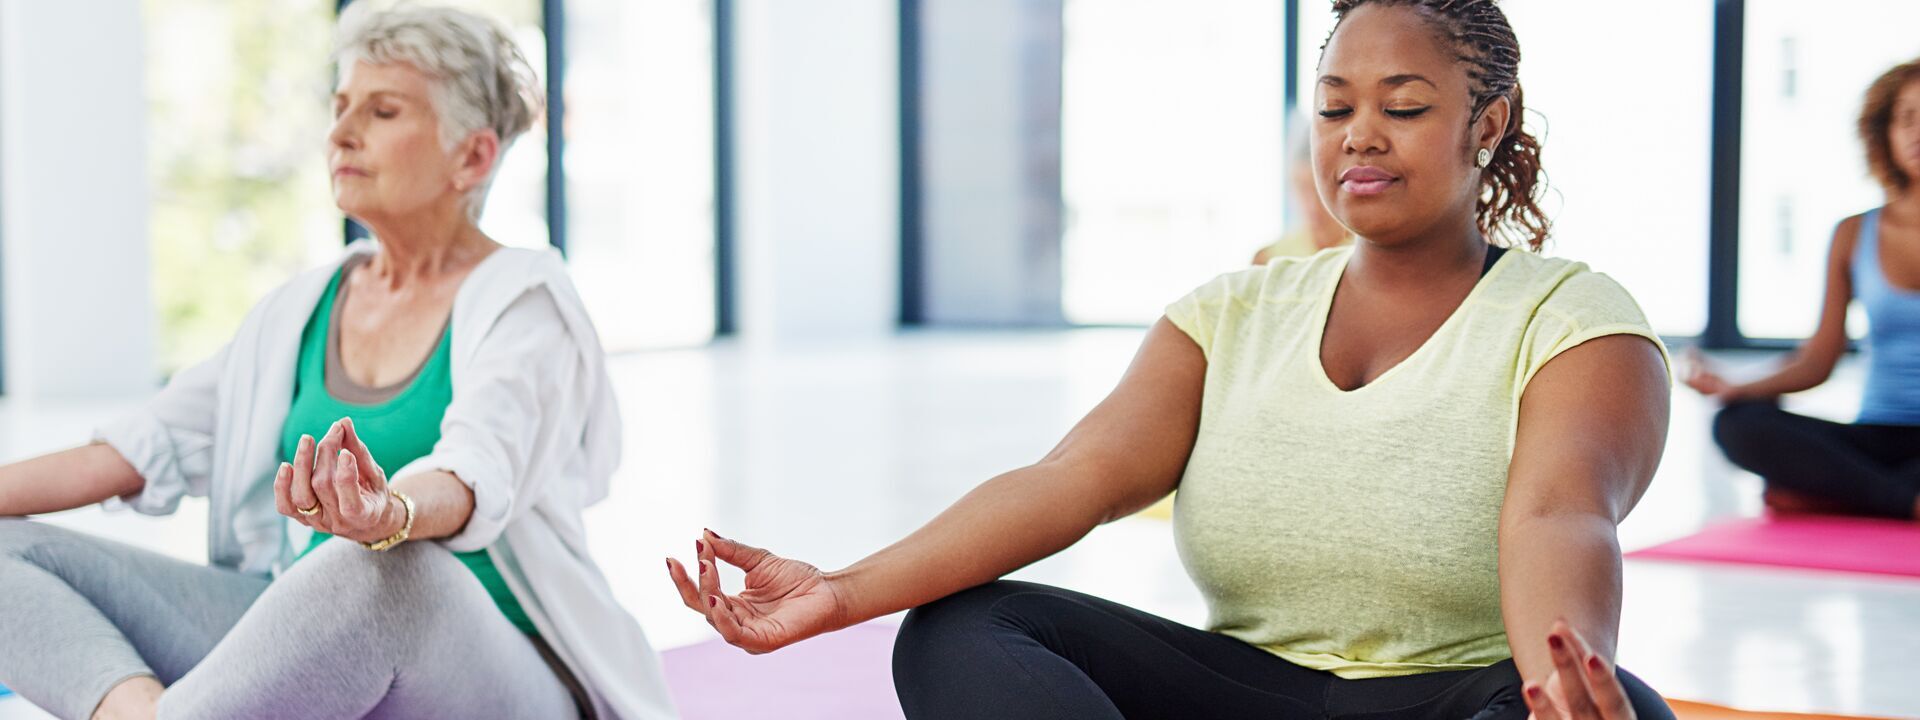 Woman relaxing through meditation at YMCA of Greater Charlotte